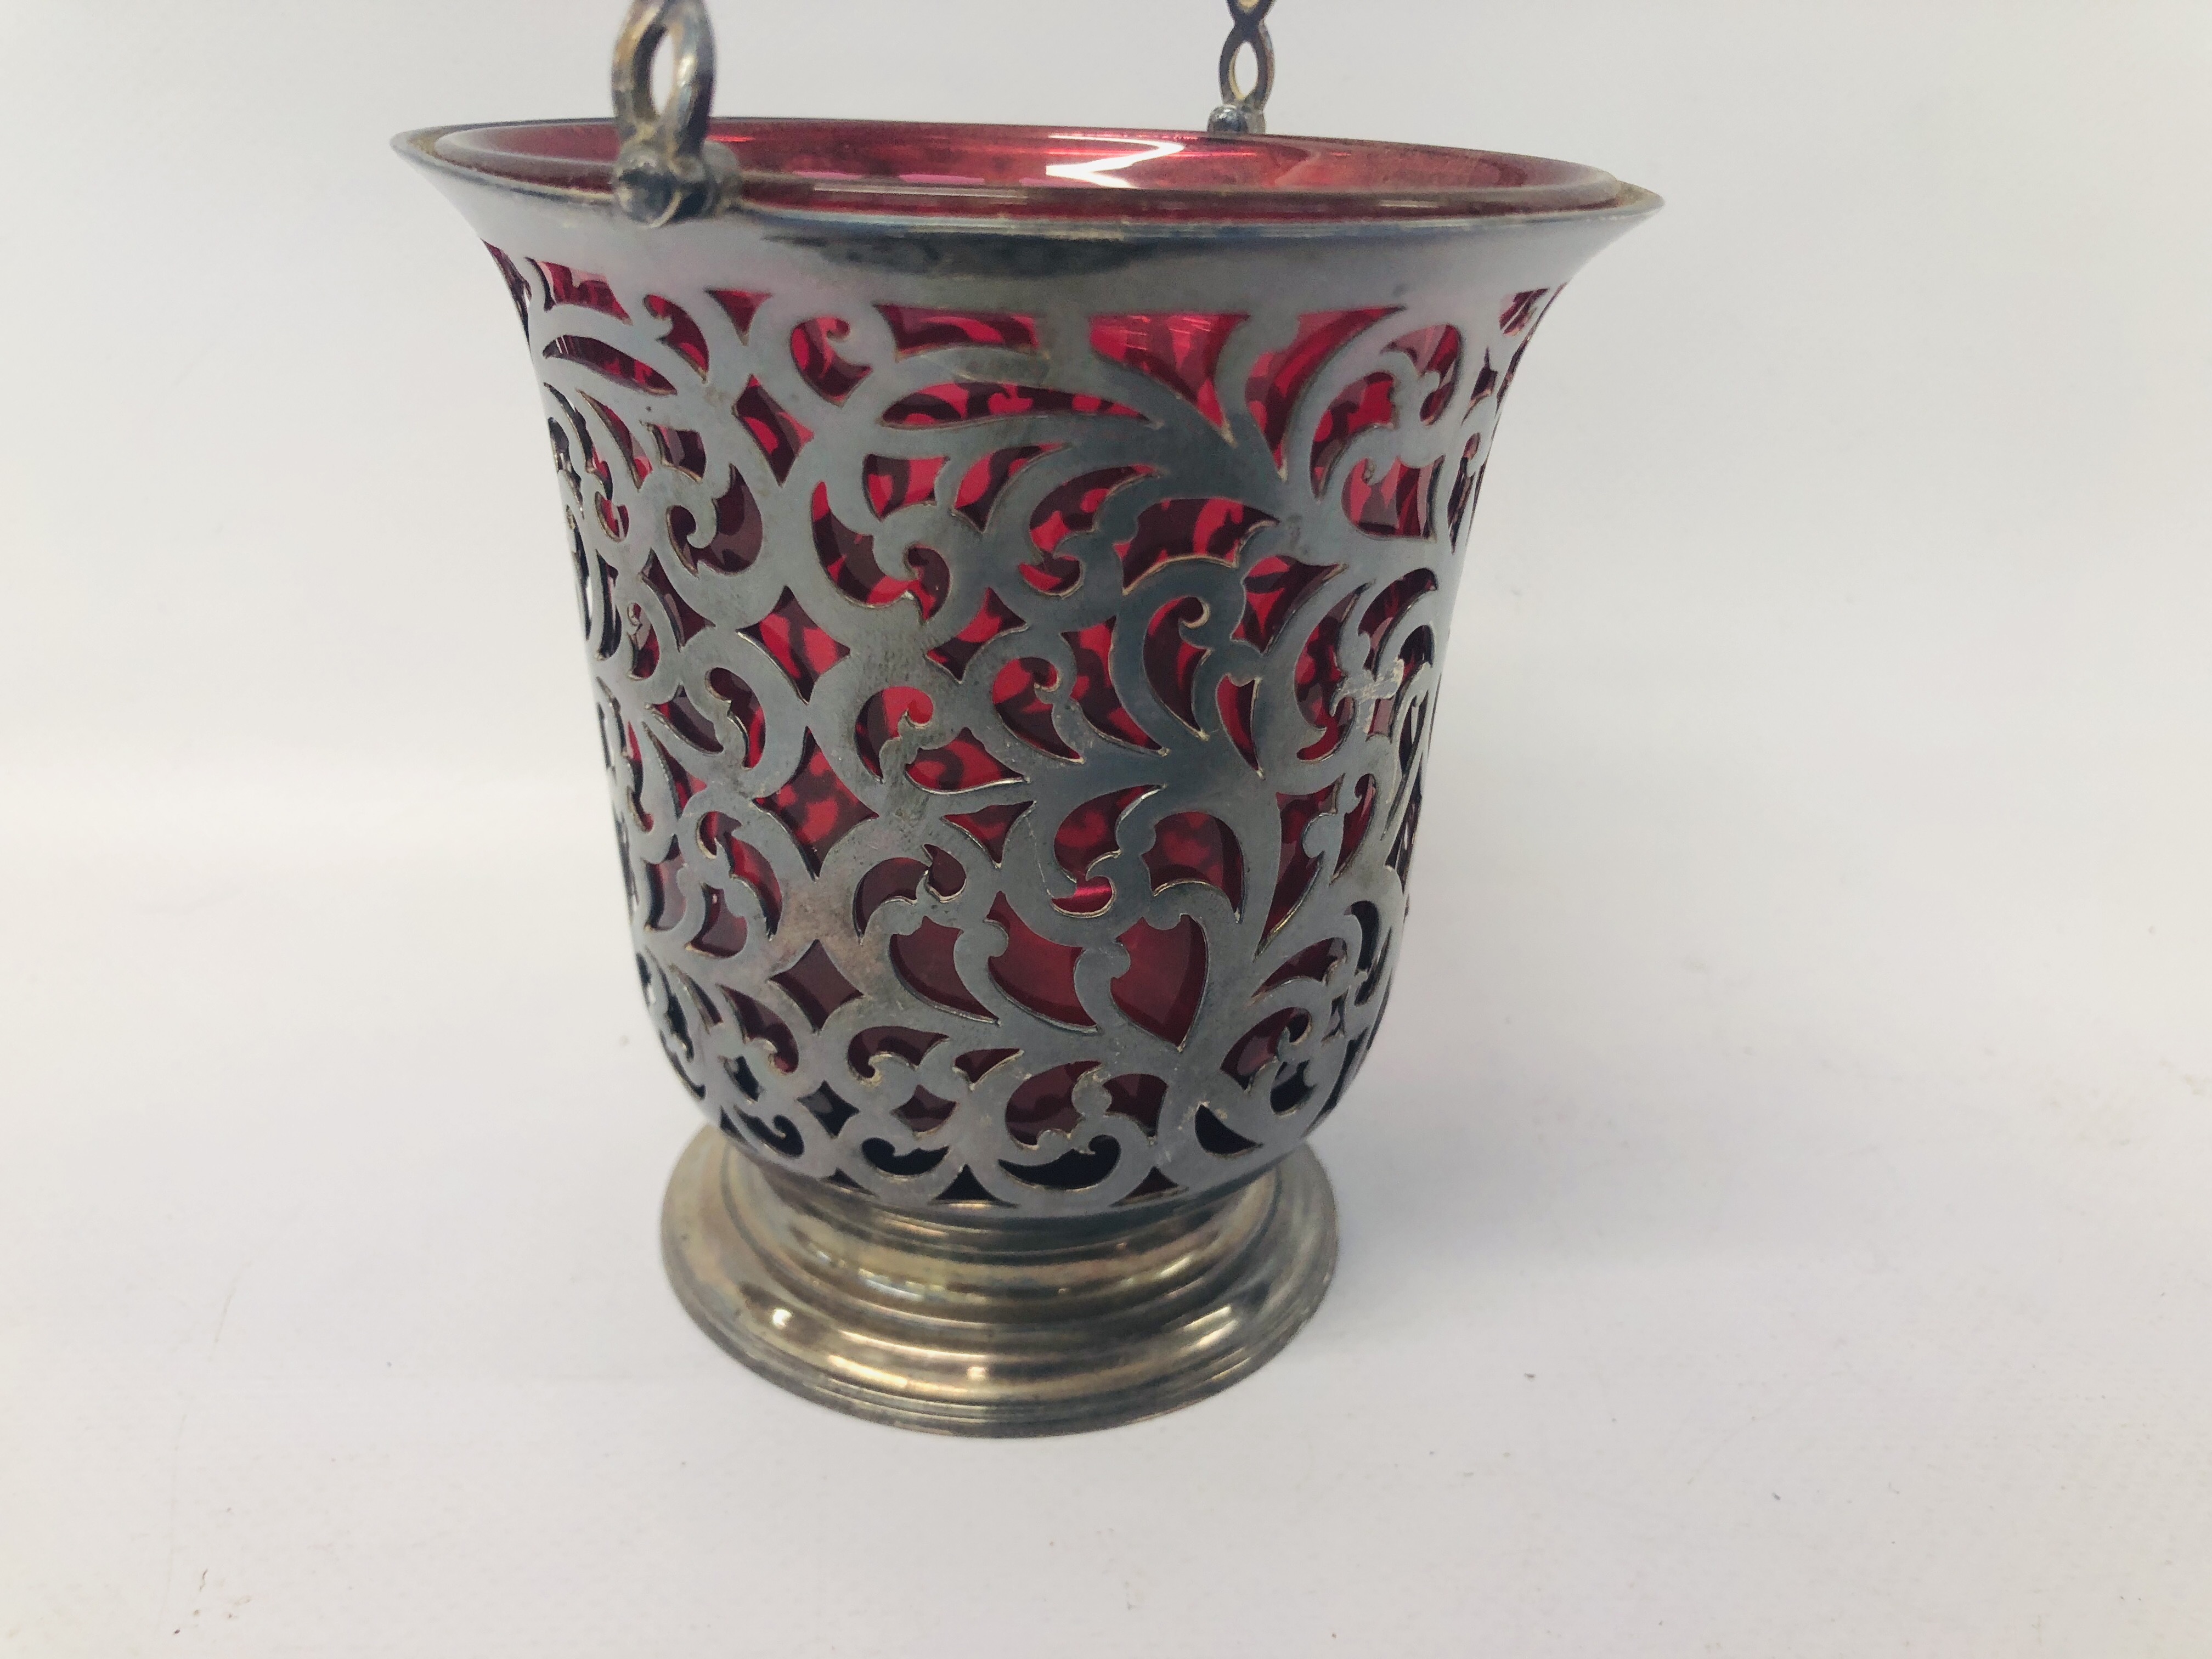 PERIOD SILVER OPEN WORK BASKET WITH CRANBERRY GLASS LINER H 11CM (NOT INCLUDING HANDLE) - Image 3 of 6